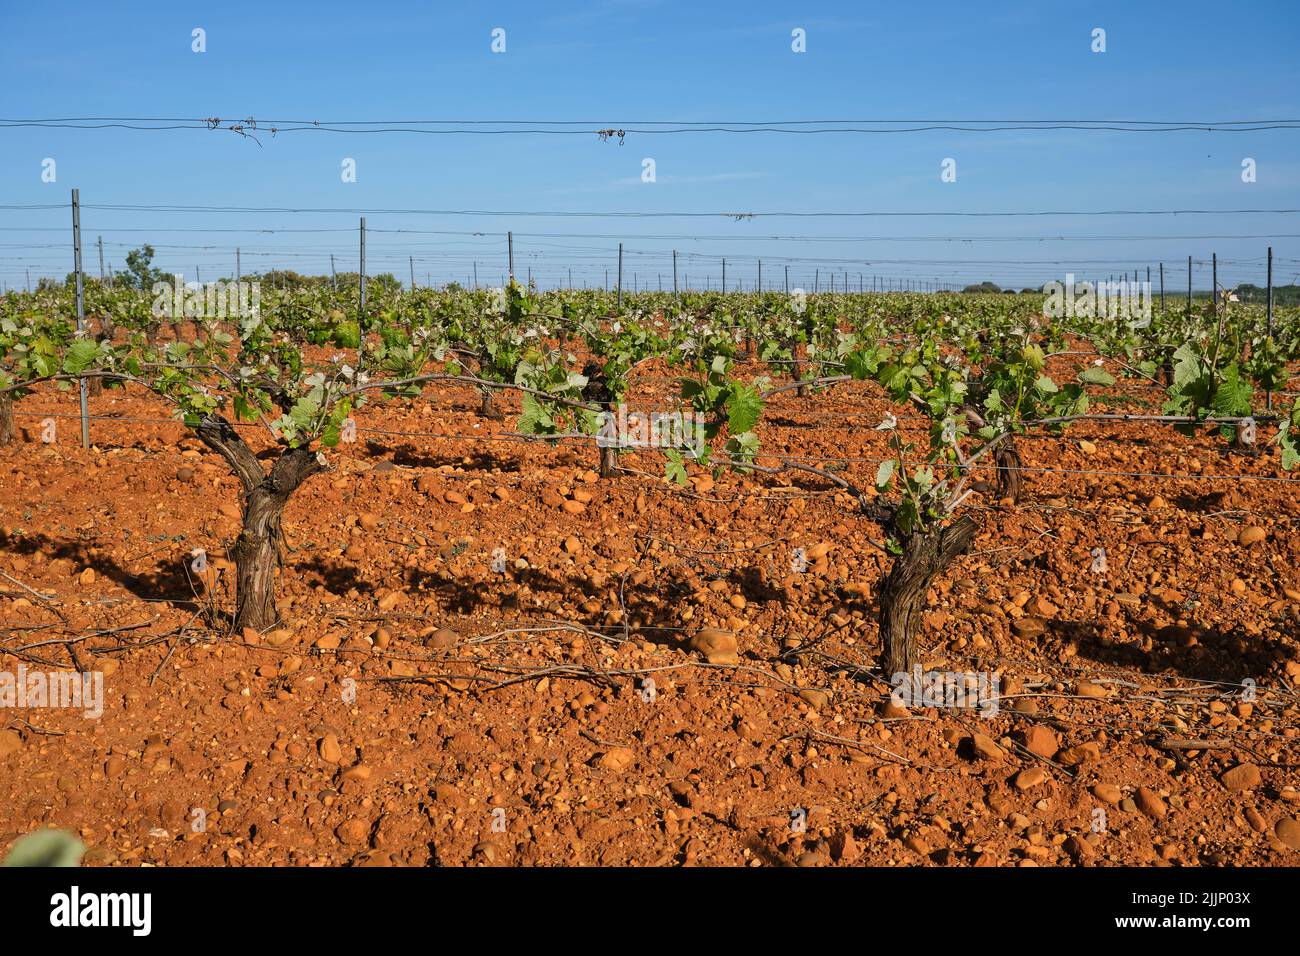 Scenic view of agricultural field with rows of grapes growing under blue sky in countryside in summer Stock Photo